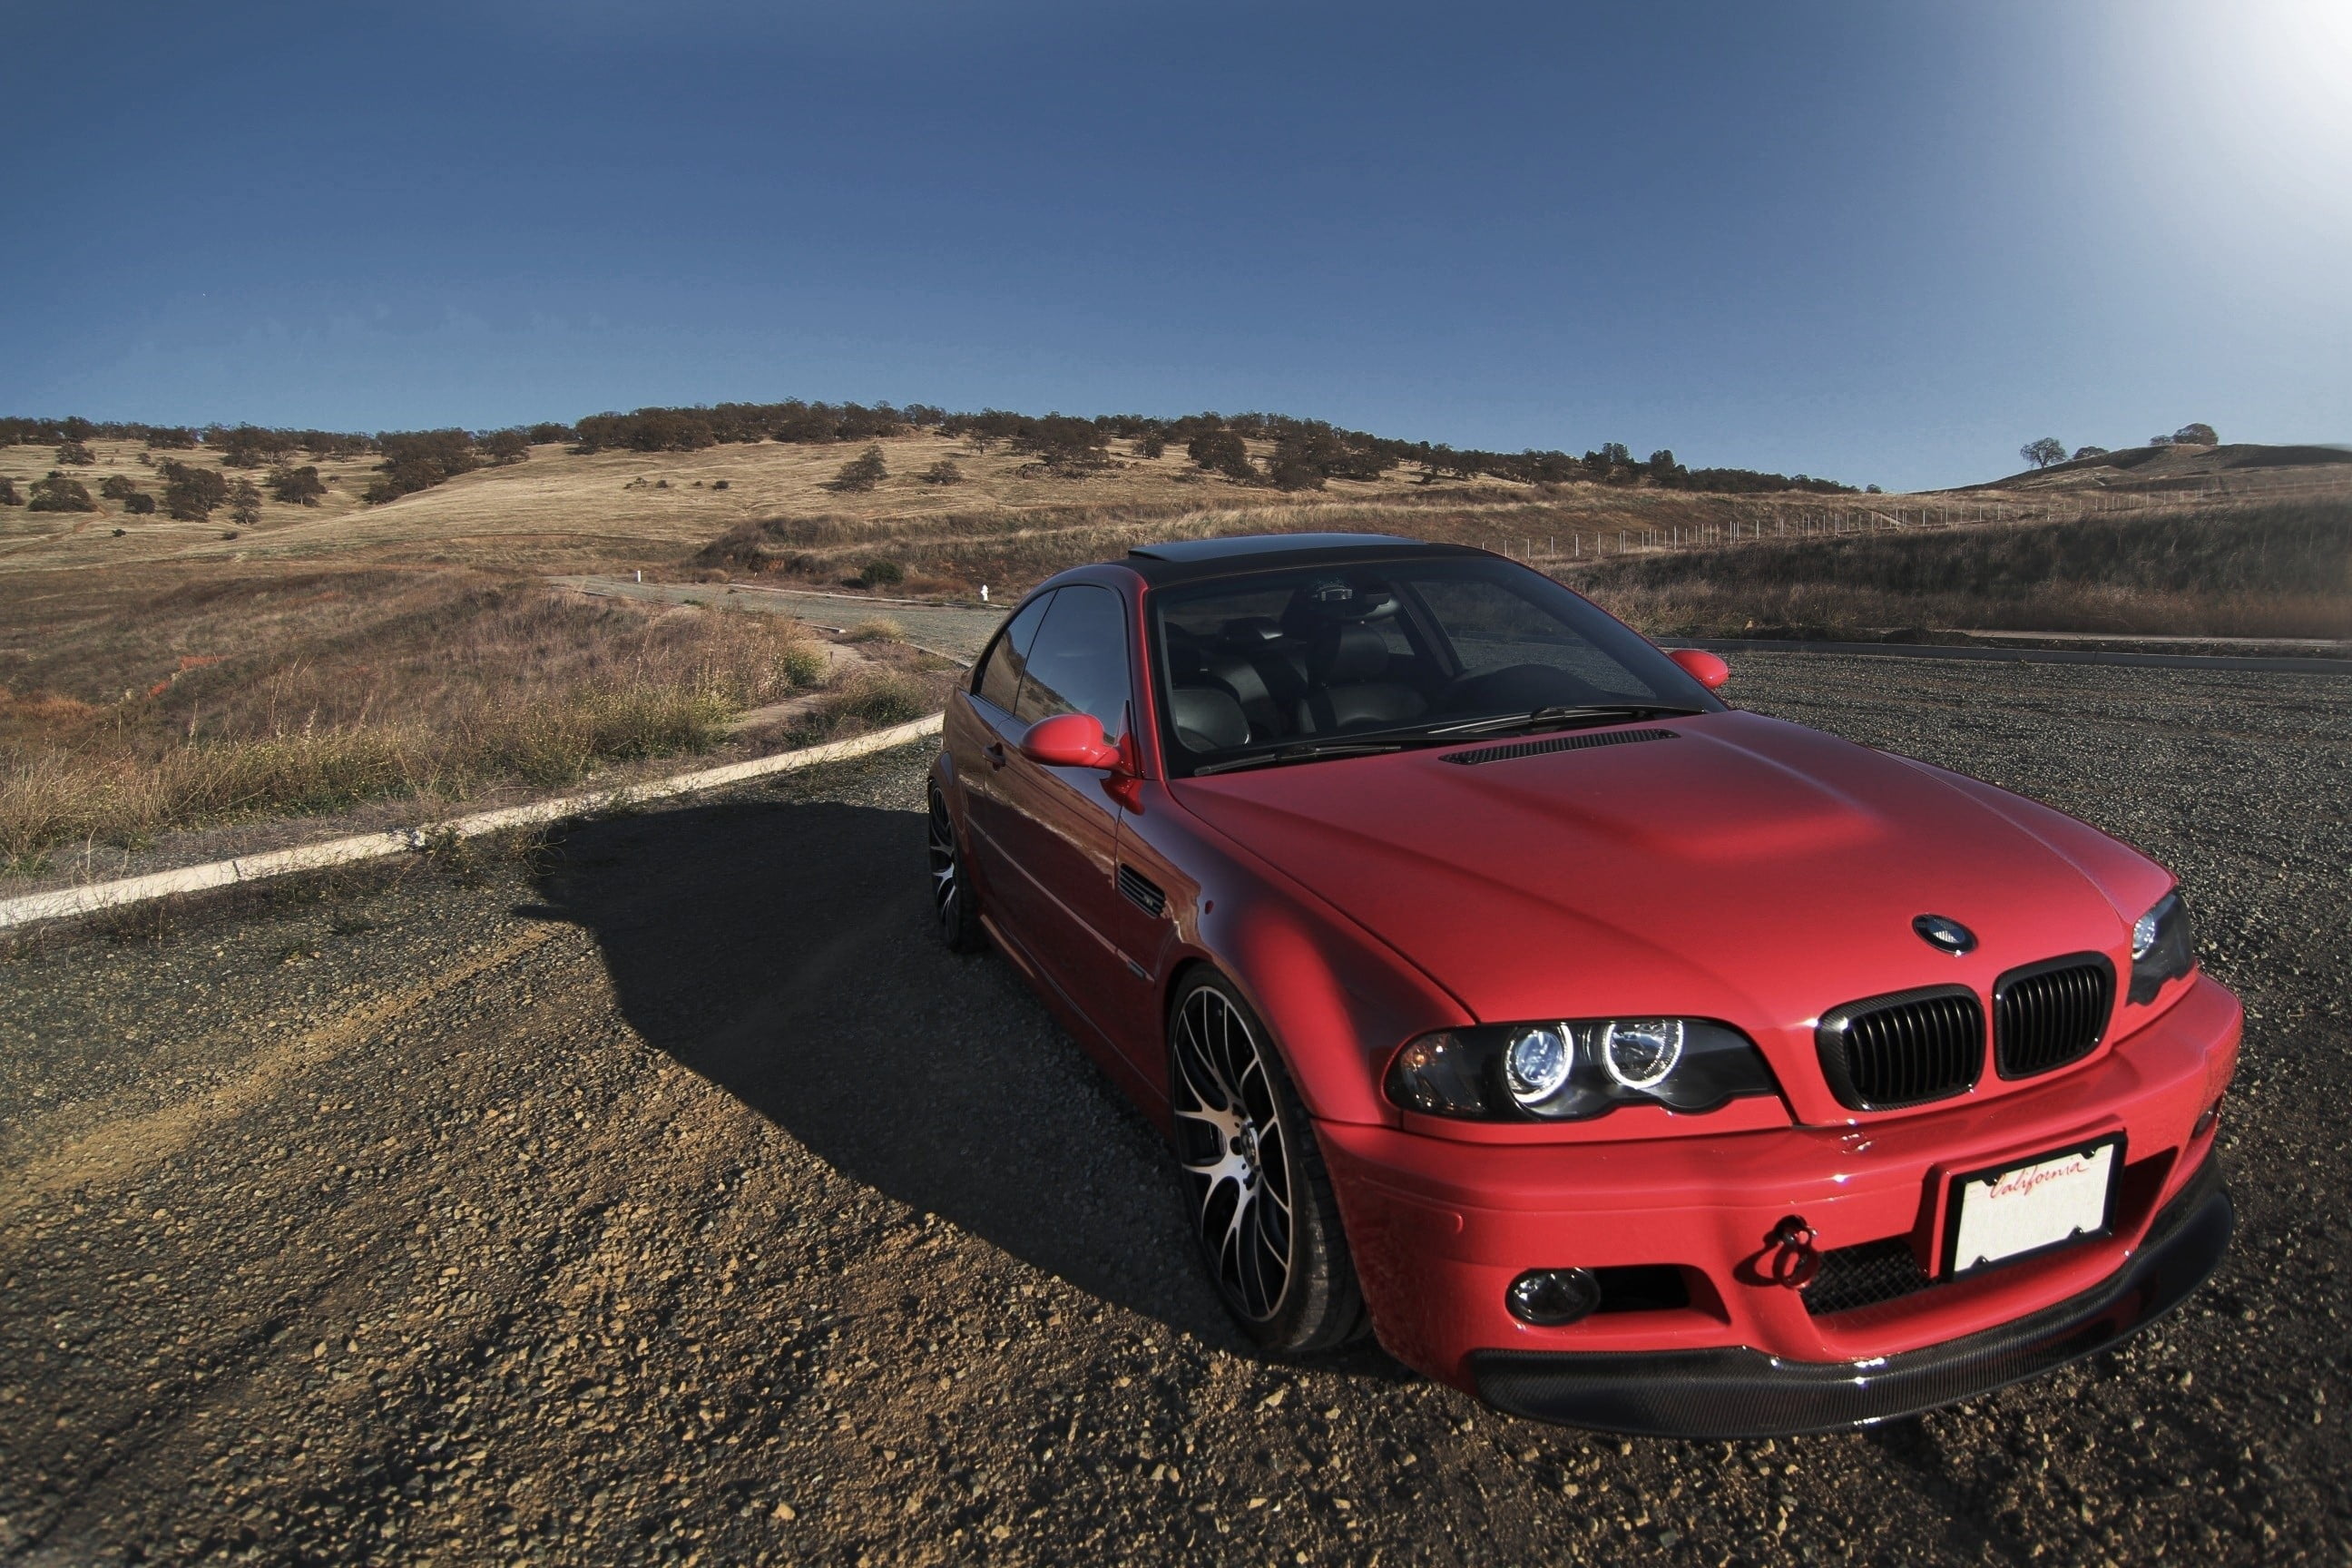 red BMW E46 coupe, car, land Vehicle, transportation, speed, sports Car